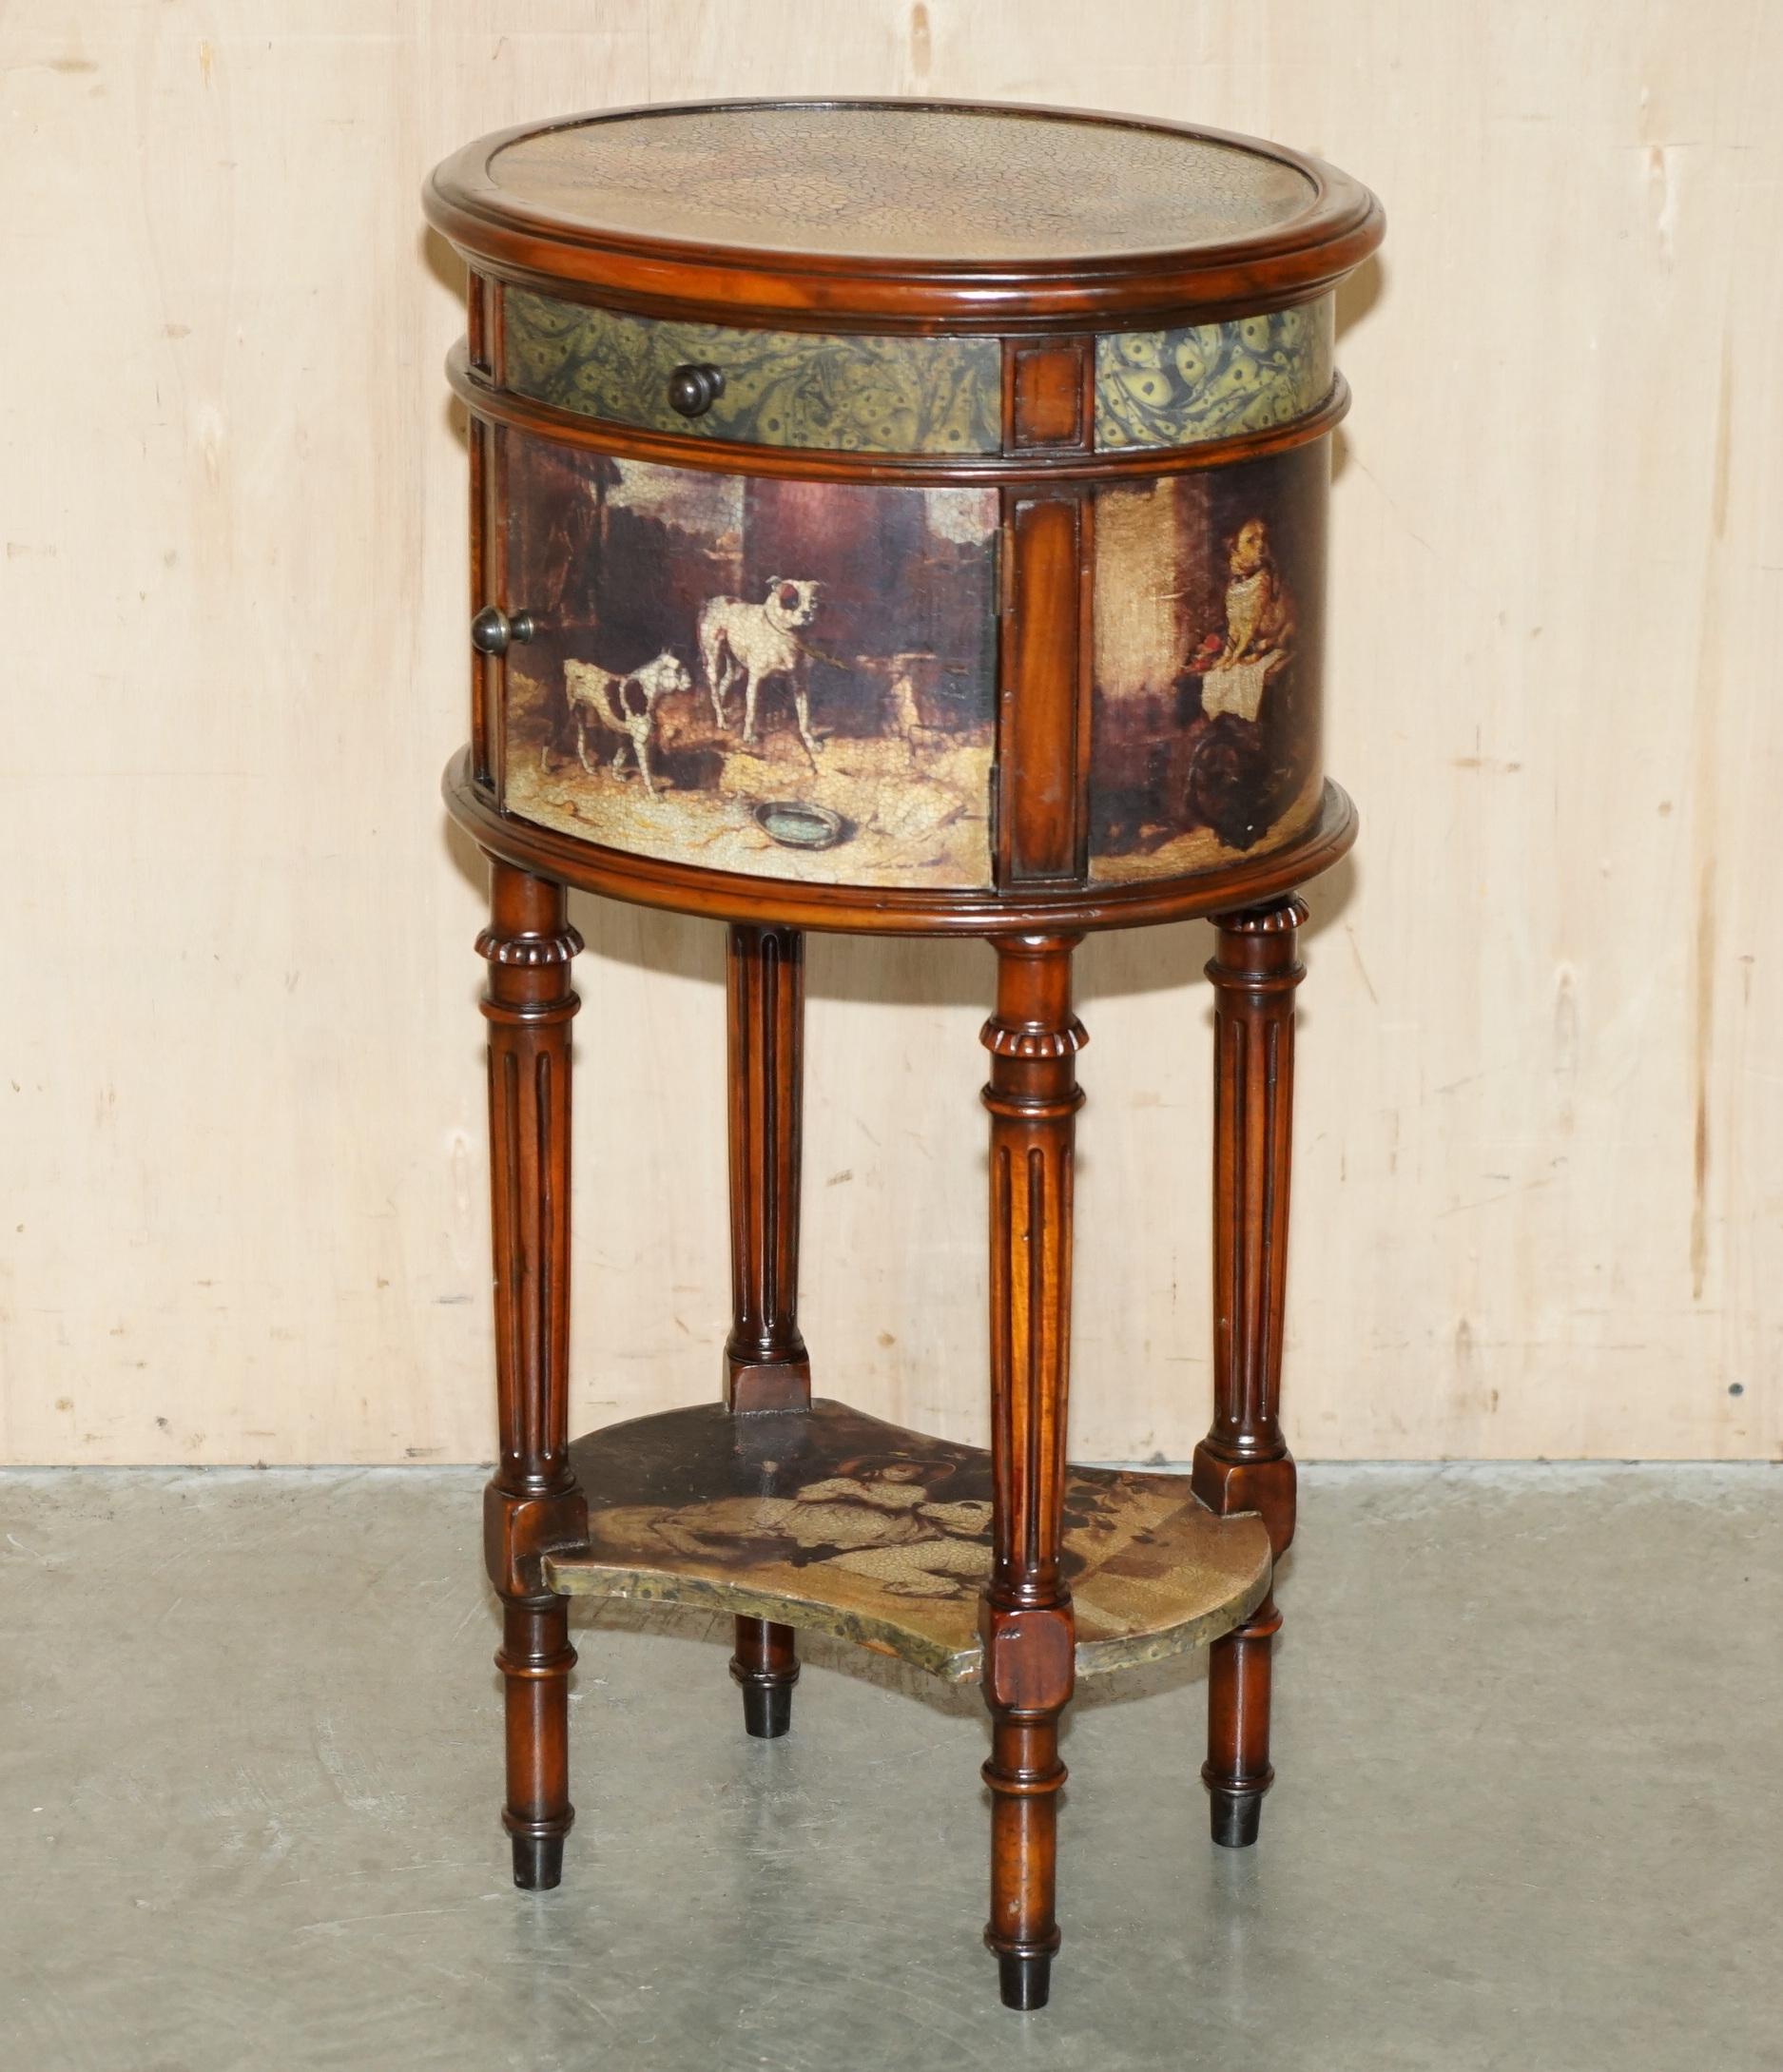 Royal House Antiques

Royal House Antiques is delighted to offer for sale this stunning, ornately hand painted side cabinet depicting dogs in different scenes 

Please note the delivery fee listed is just a guide, it covers within the M25 only for